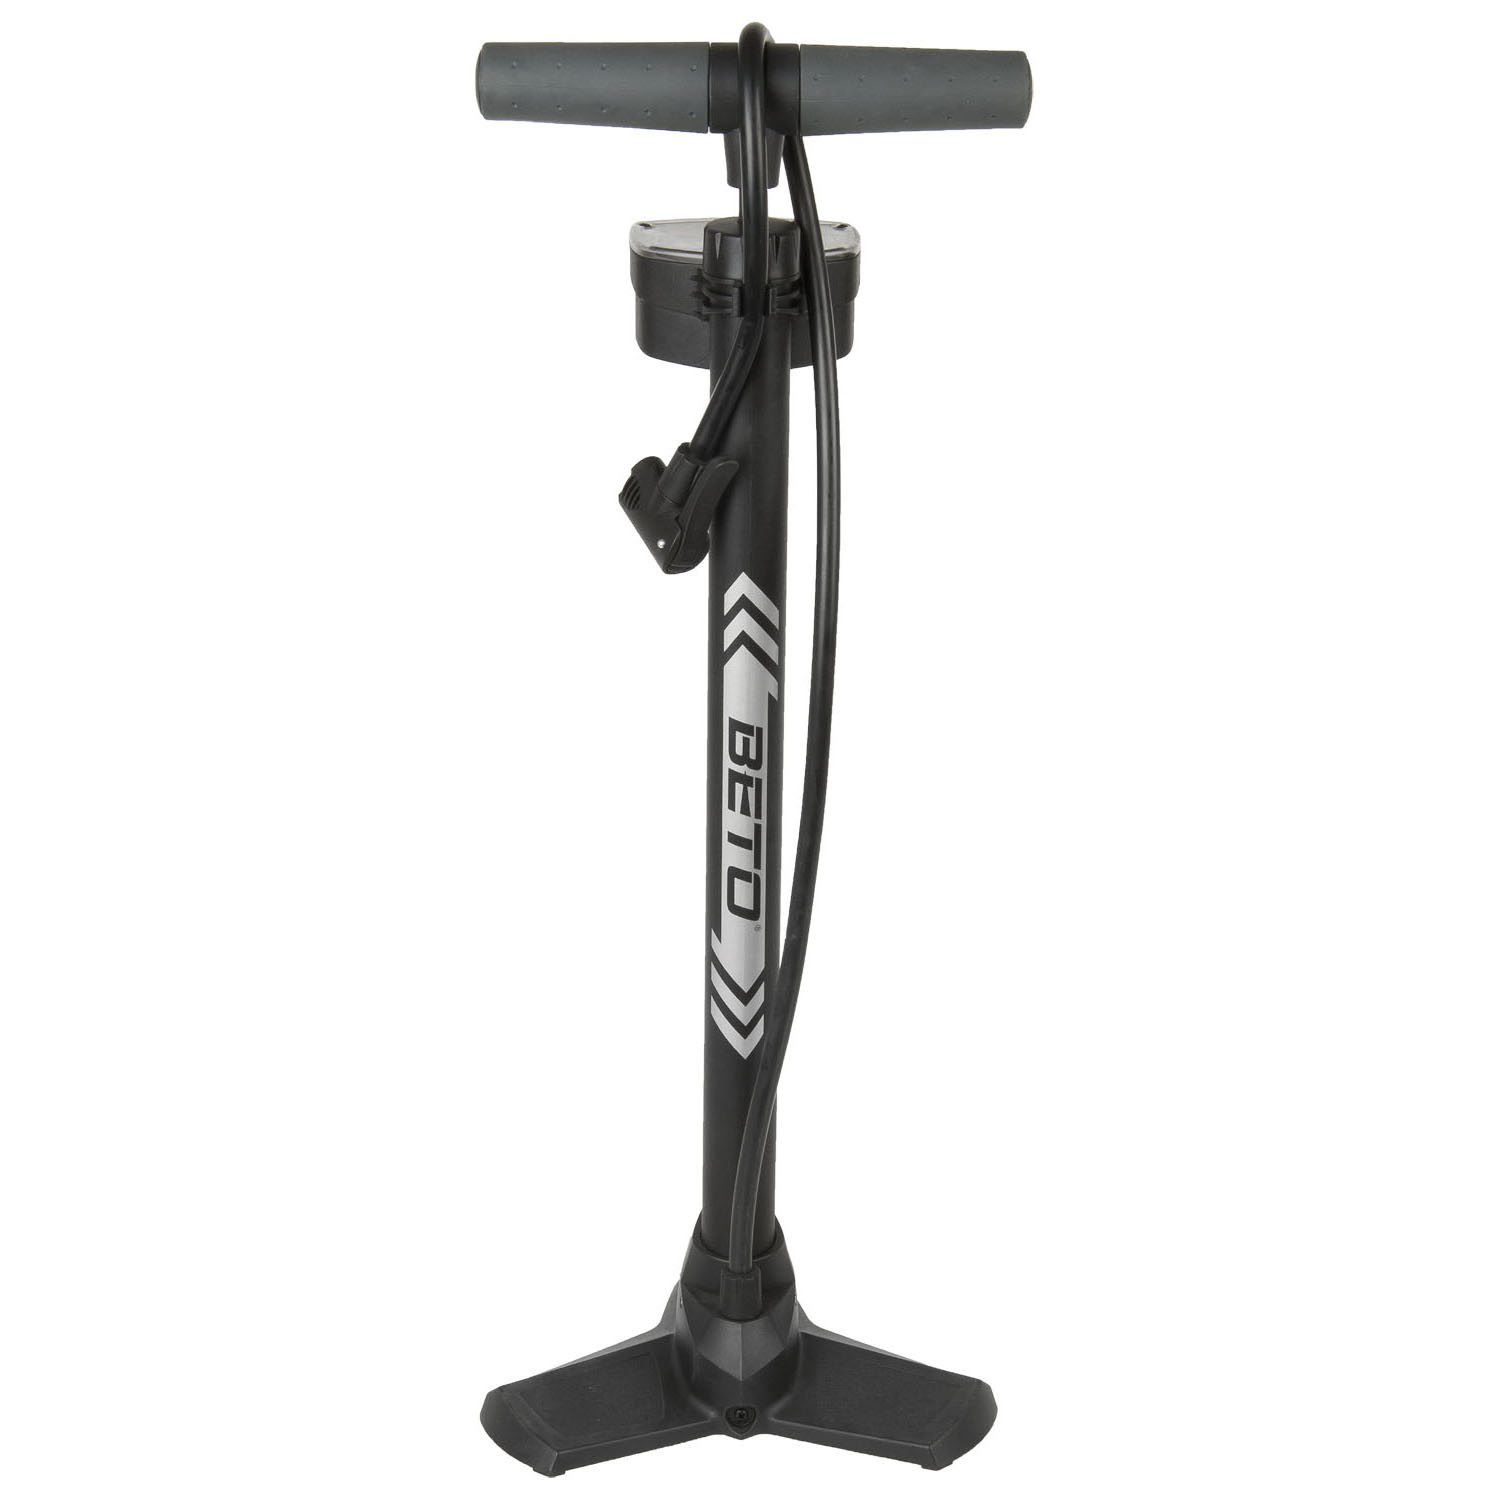 BETO 11/160 B floor pump – AVAILABLE IN SELECTED BIKE SHOPS